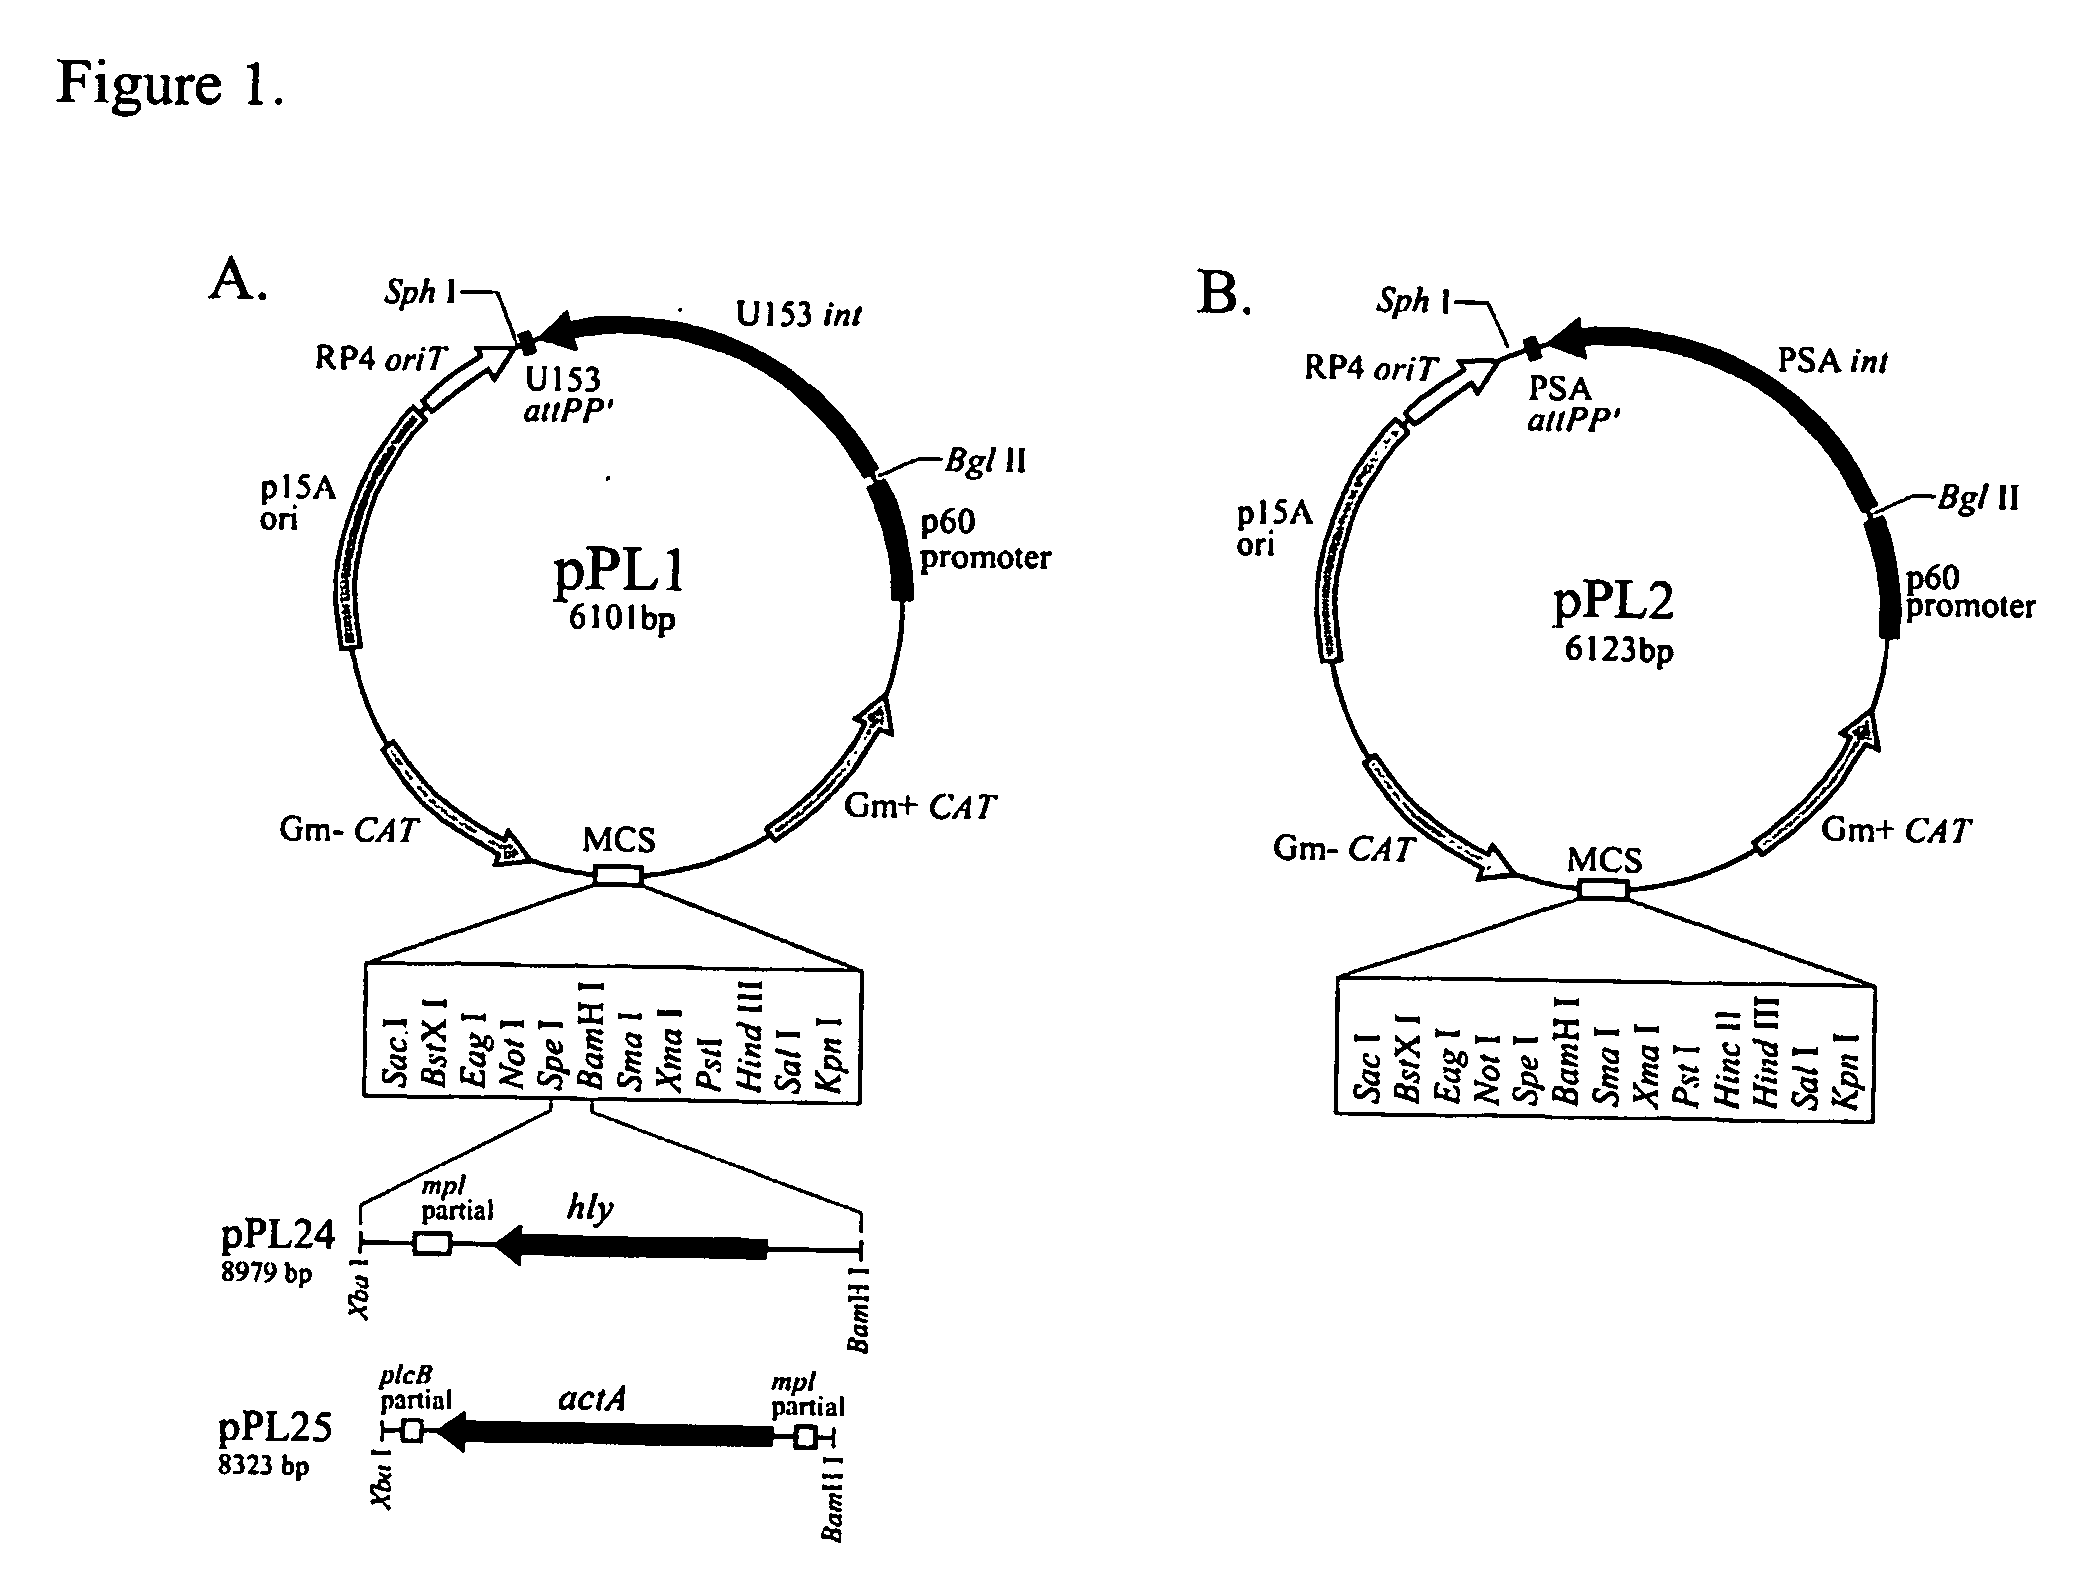 Site specific listeria integration vectors and methods for using the same